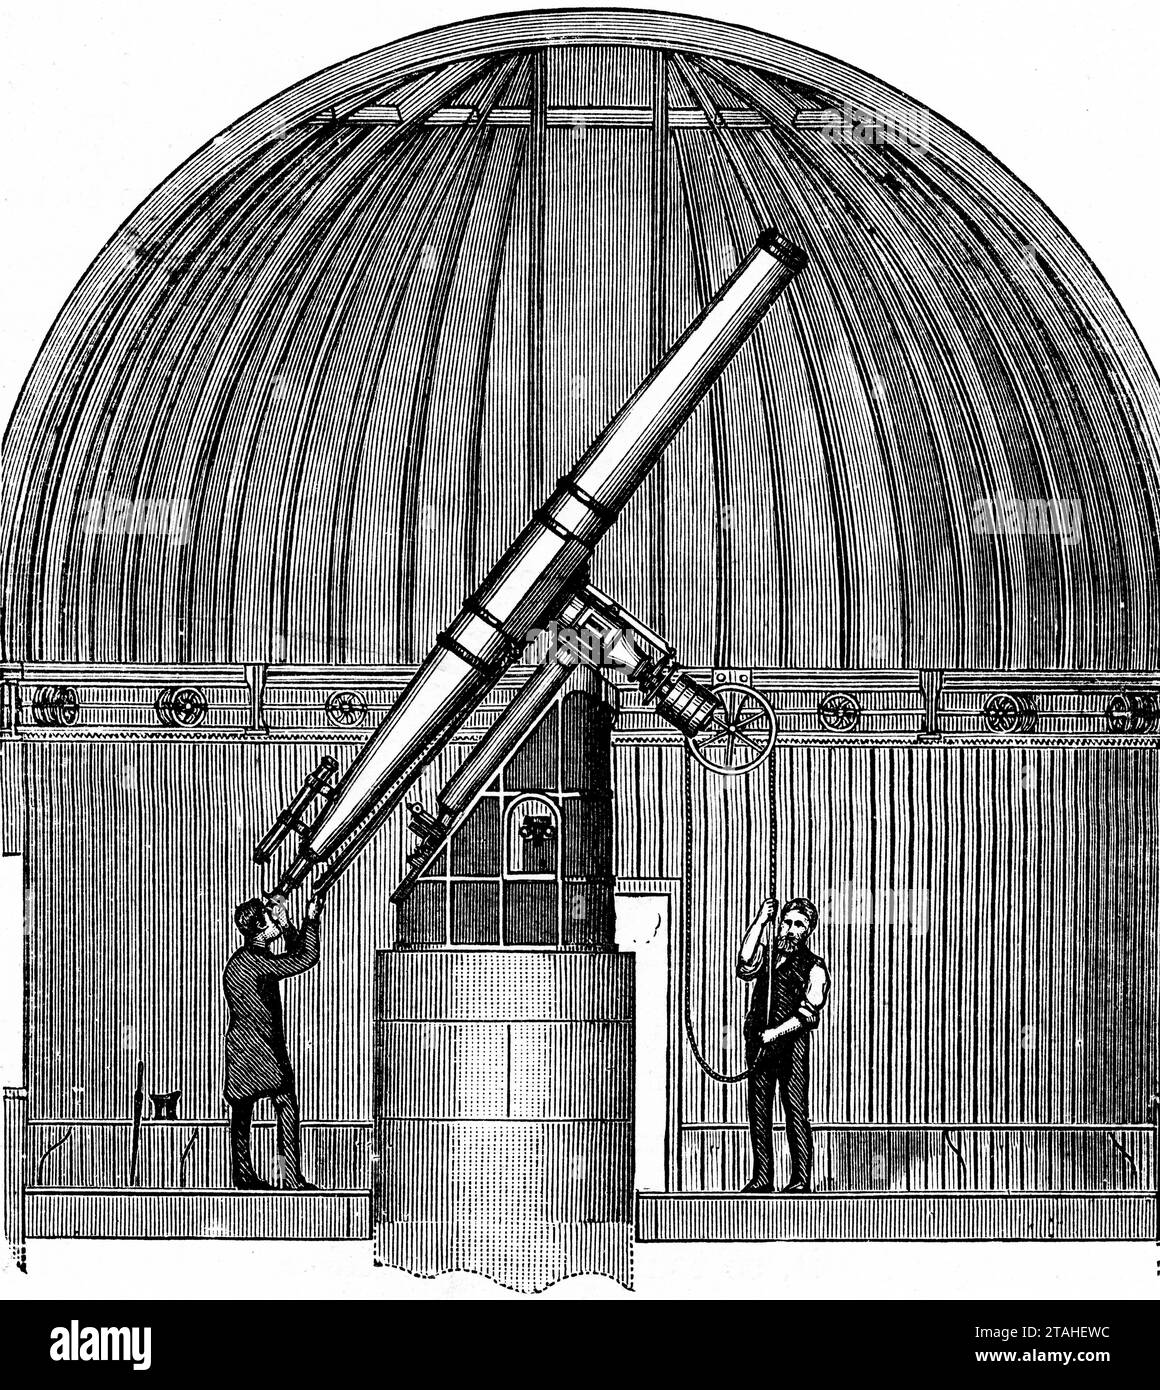 A section of the dome of Dunsink Observatory, Ireland, c1889. A view showing the South Dome and South Telescope. The South Telescope, a 12-inch Grubb instrument, is a refracting telescope built by Thomas Grubb of Dublin, and completed in 1868. Stock Photo